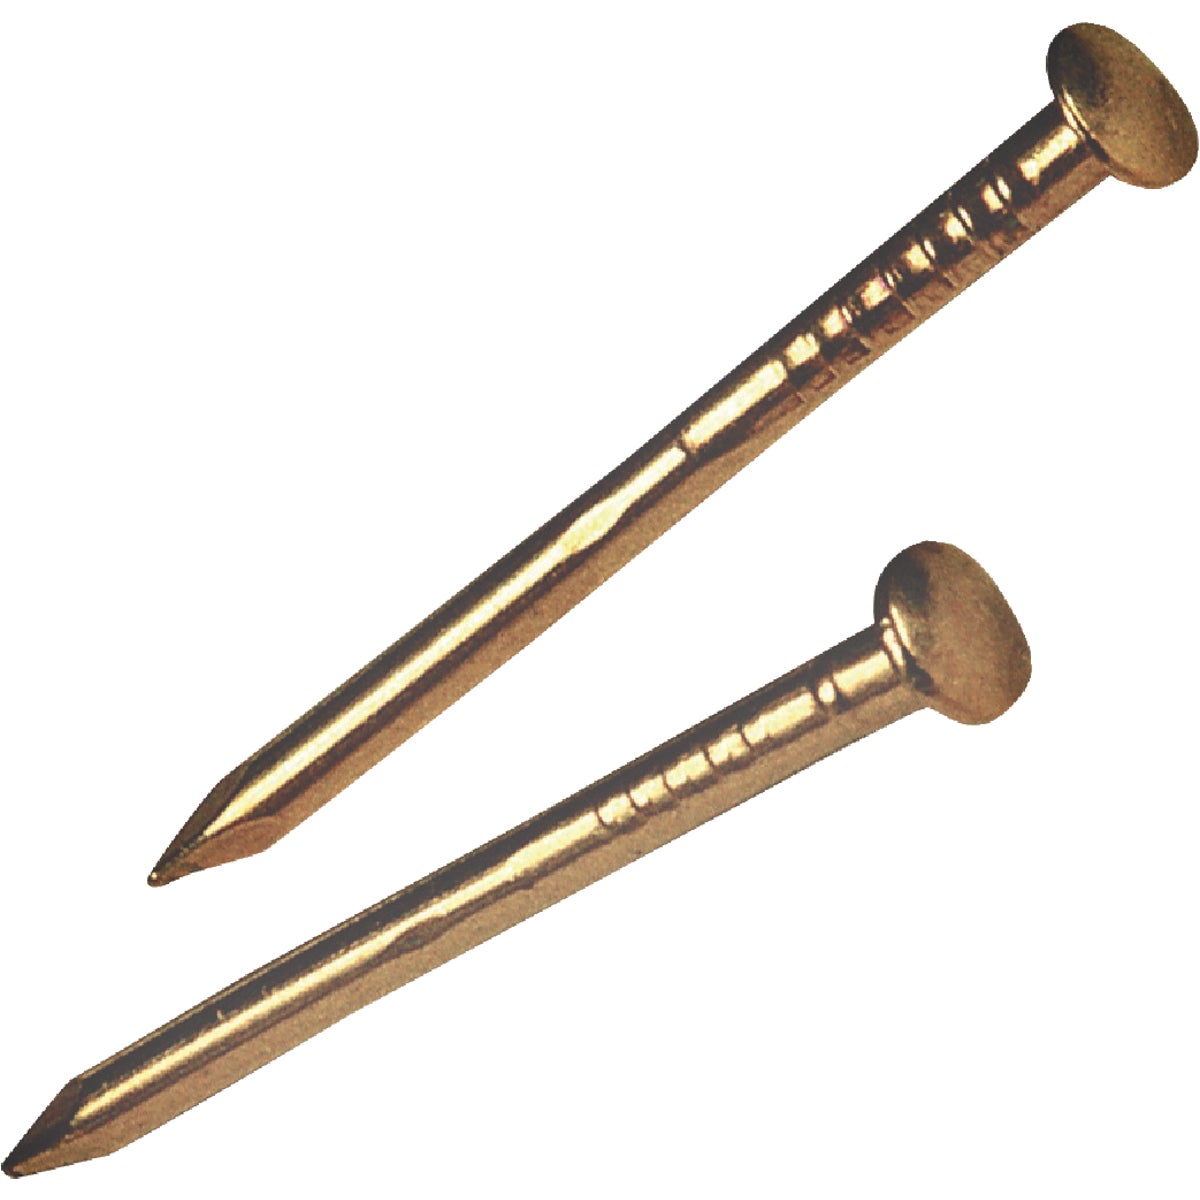 Item 728653, Brass Escutcheon Pins feature a smooth shank with a large half-round, 